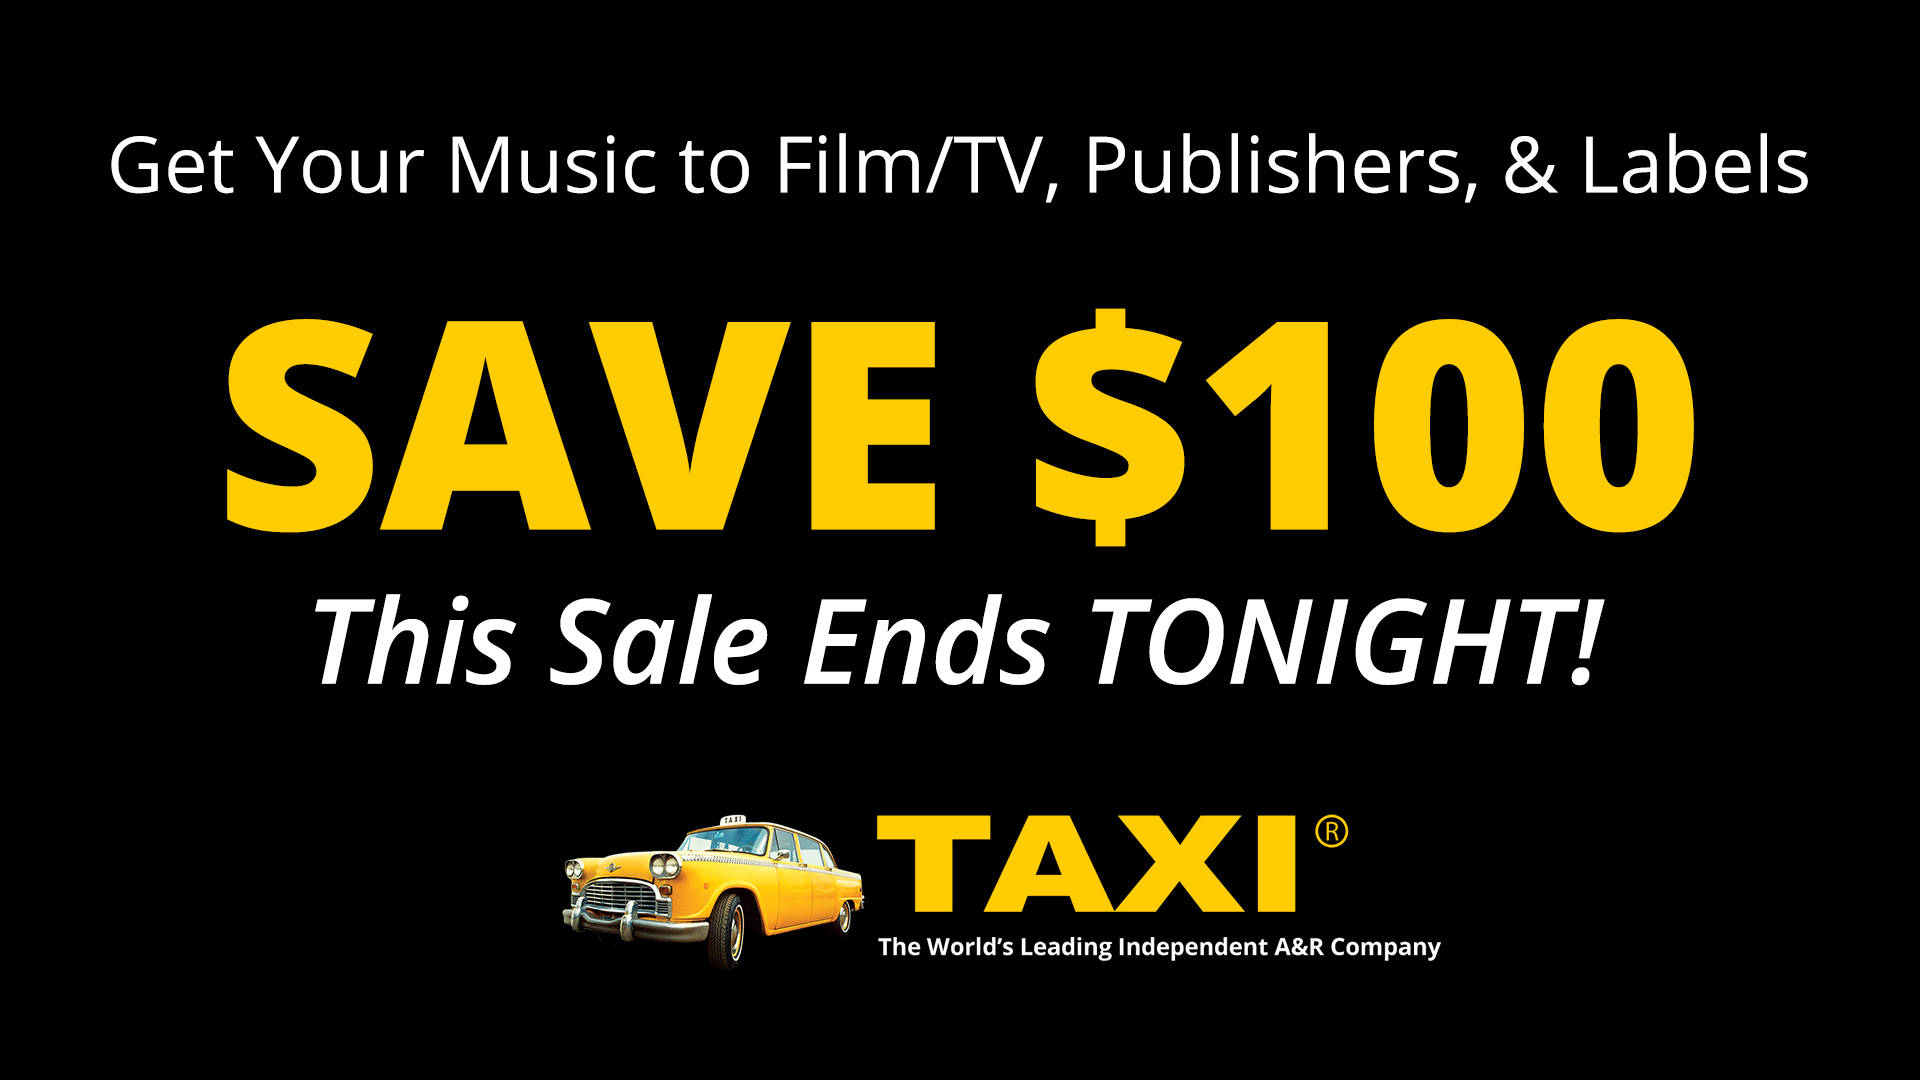 SAVE $100 on TAXI - This Sale Ends TONIGHT!